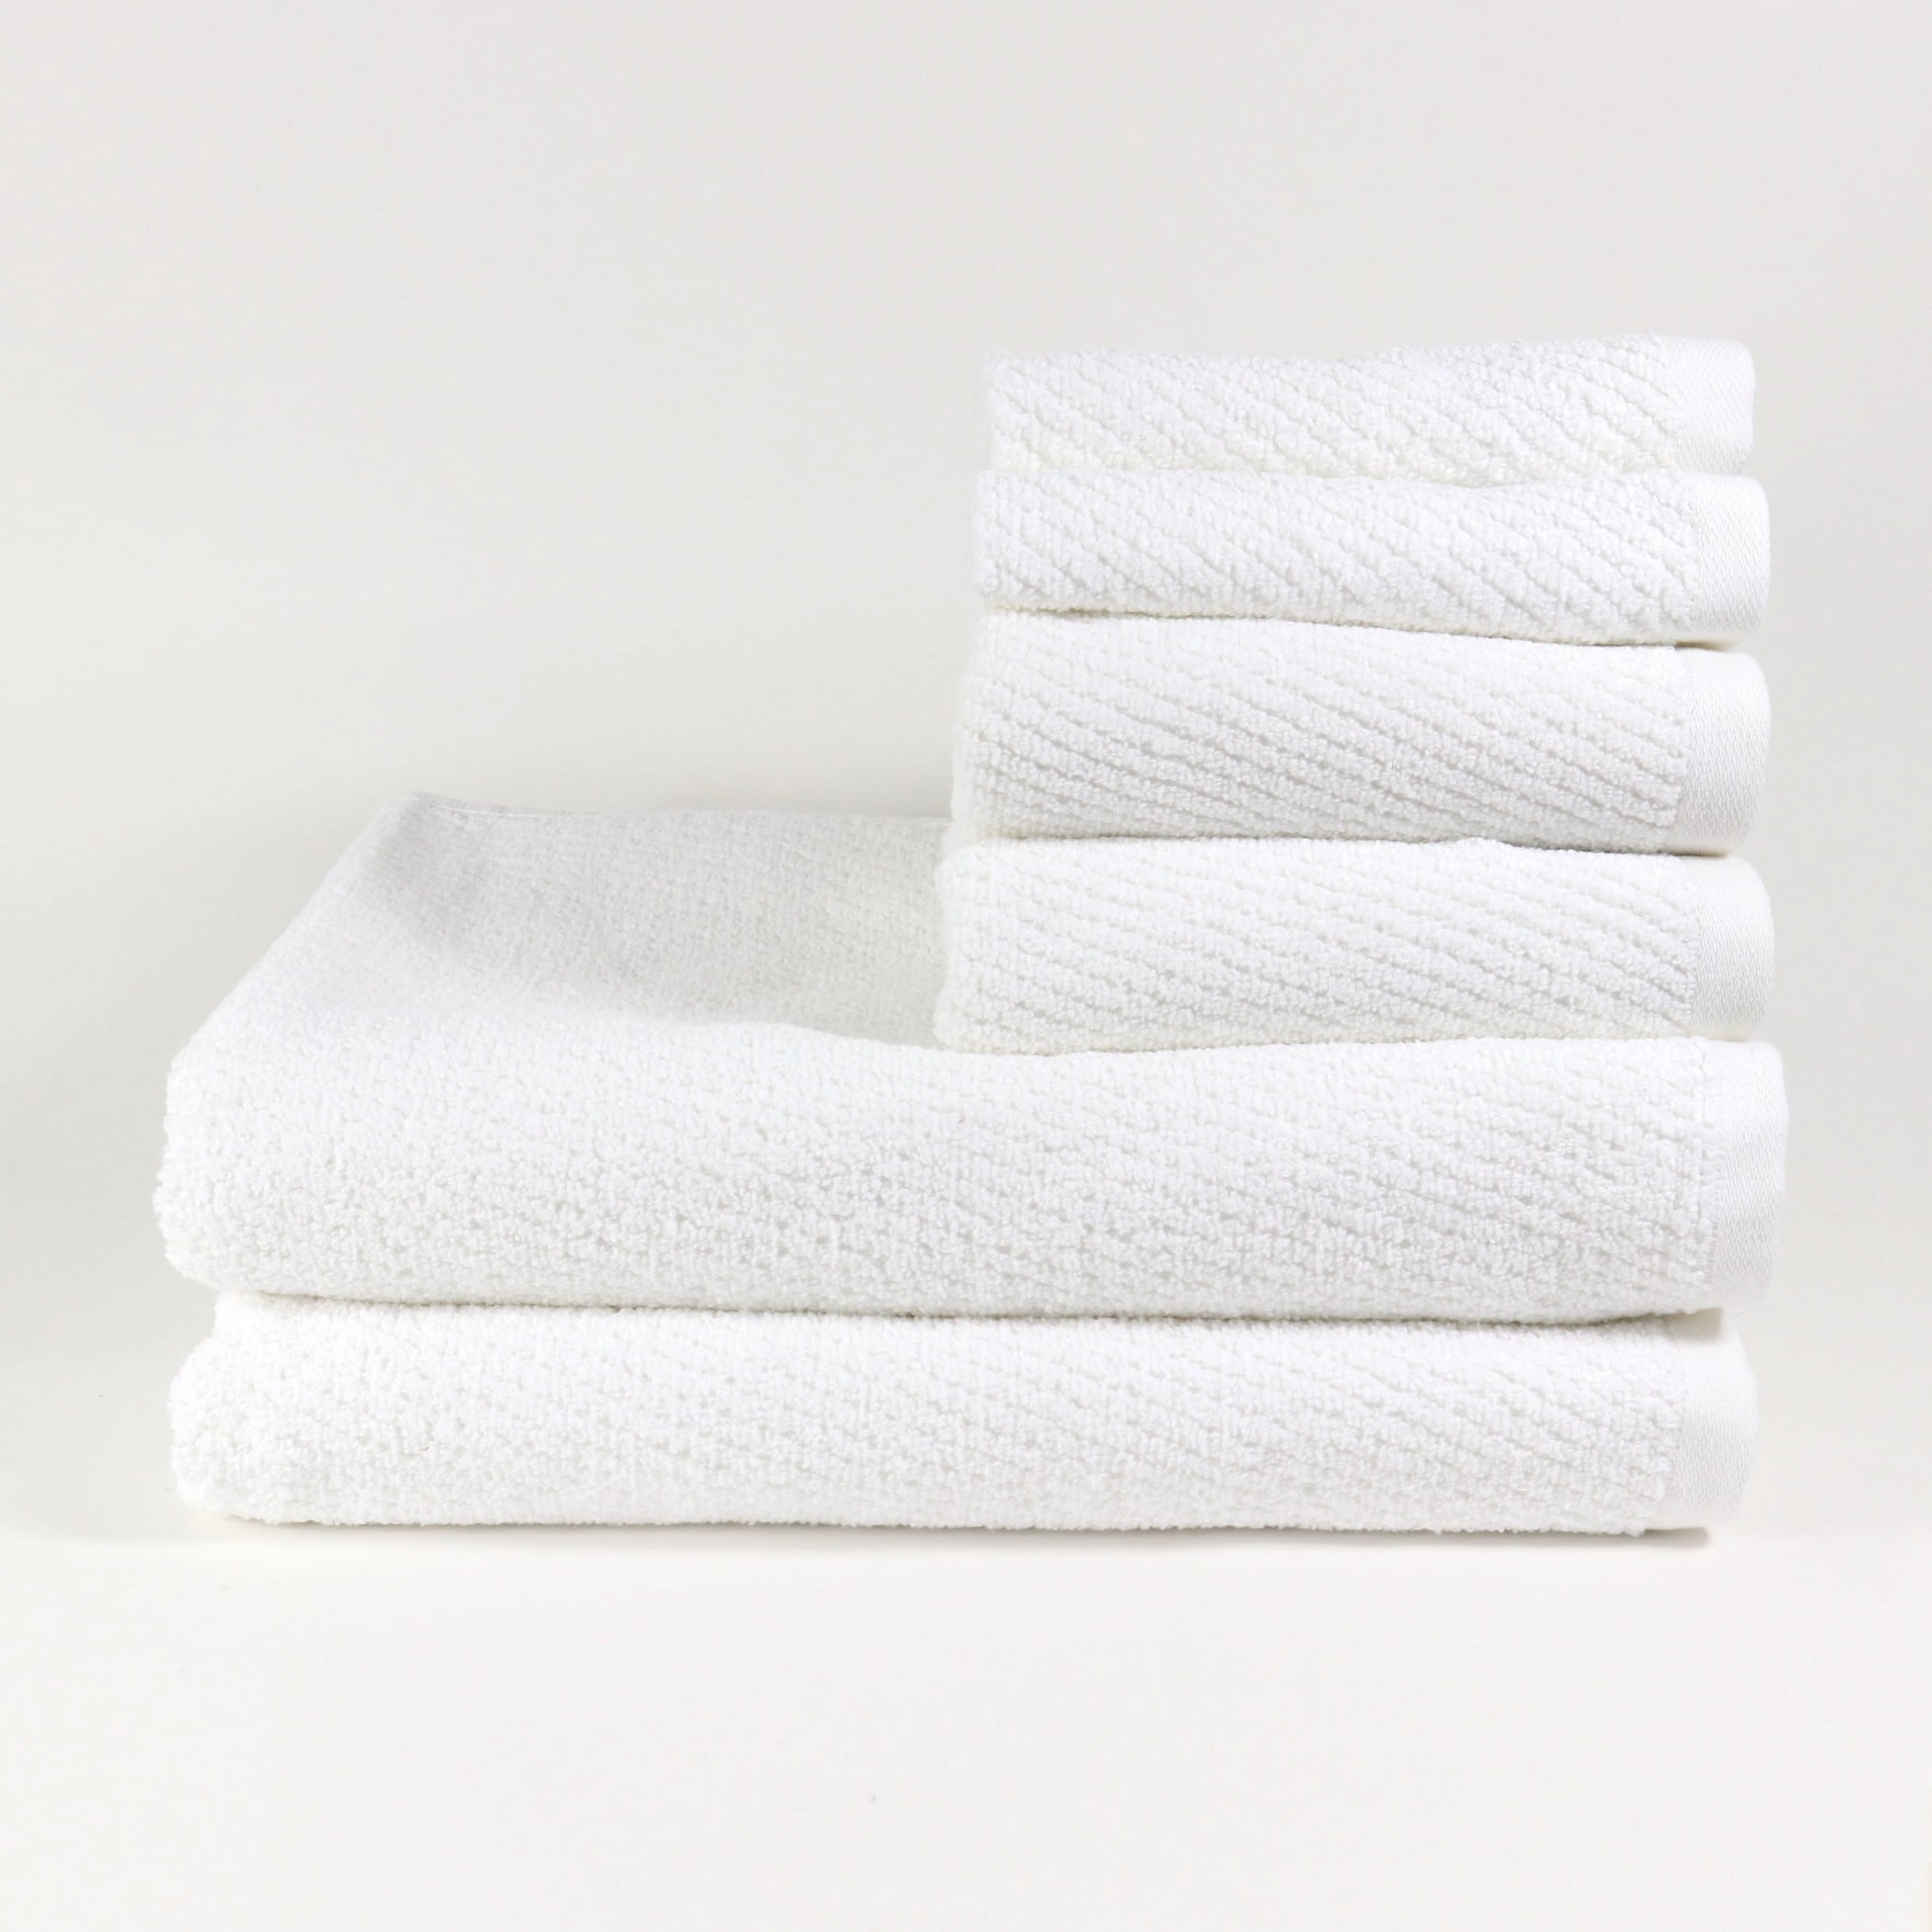 Towel and Linen Mart 4 Pieces Bath Towel Sets - Beige - Soft Feel Luxurious,Quick Dry, Extra Absorbent, 100% Ring Spun Cotton 600 GSM (27 x 54)